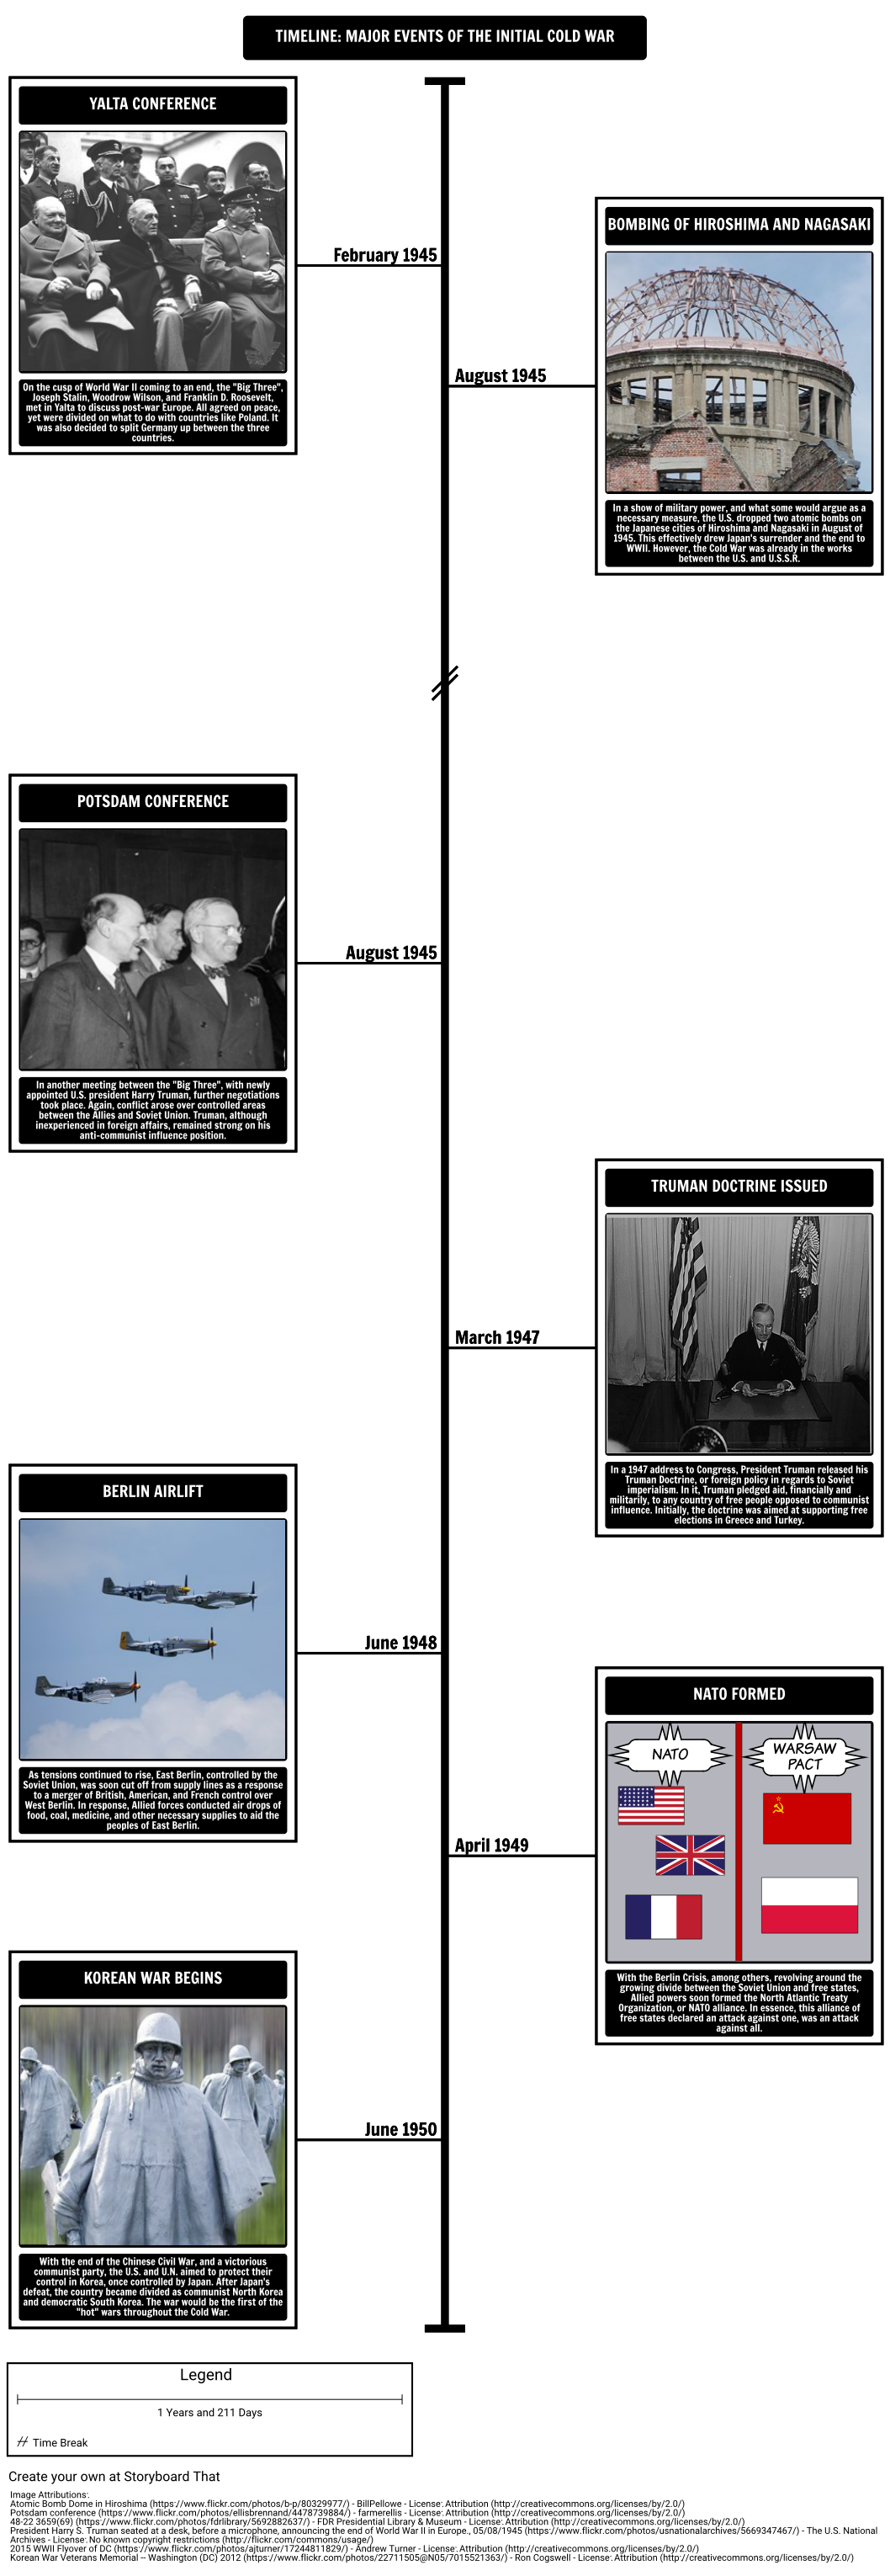 Timeline  Major Events Of The Initial Cold War 